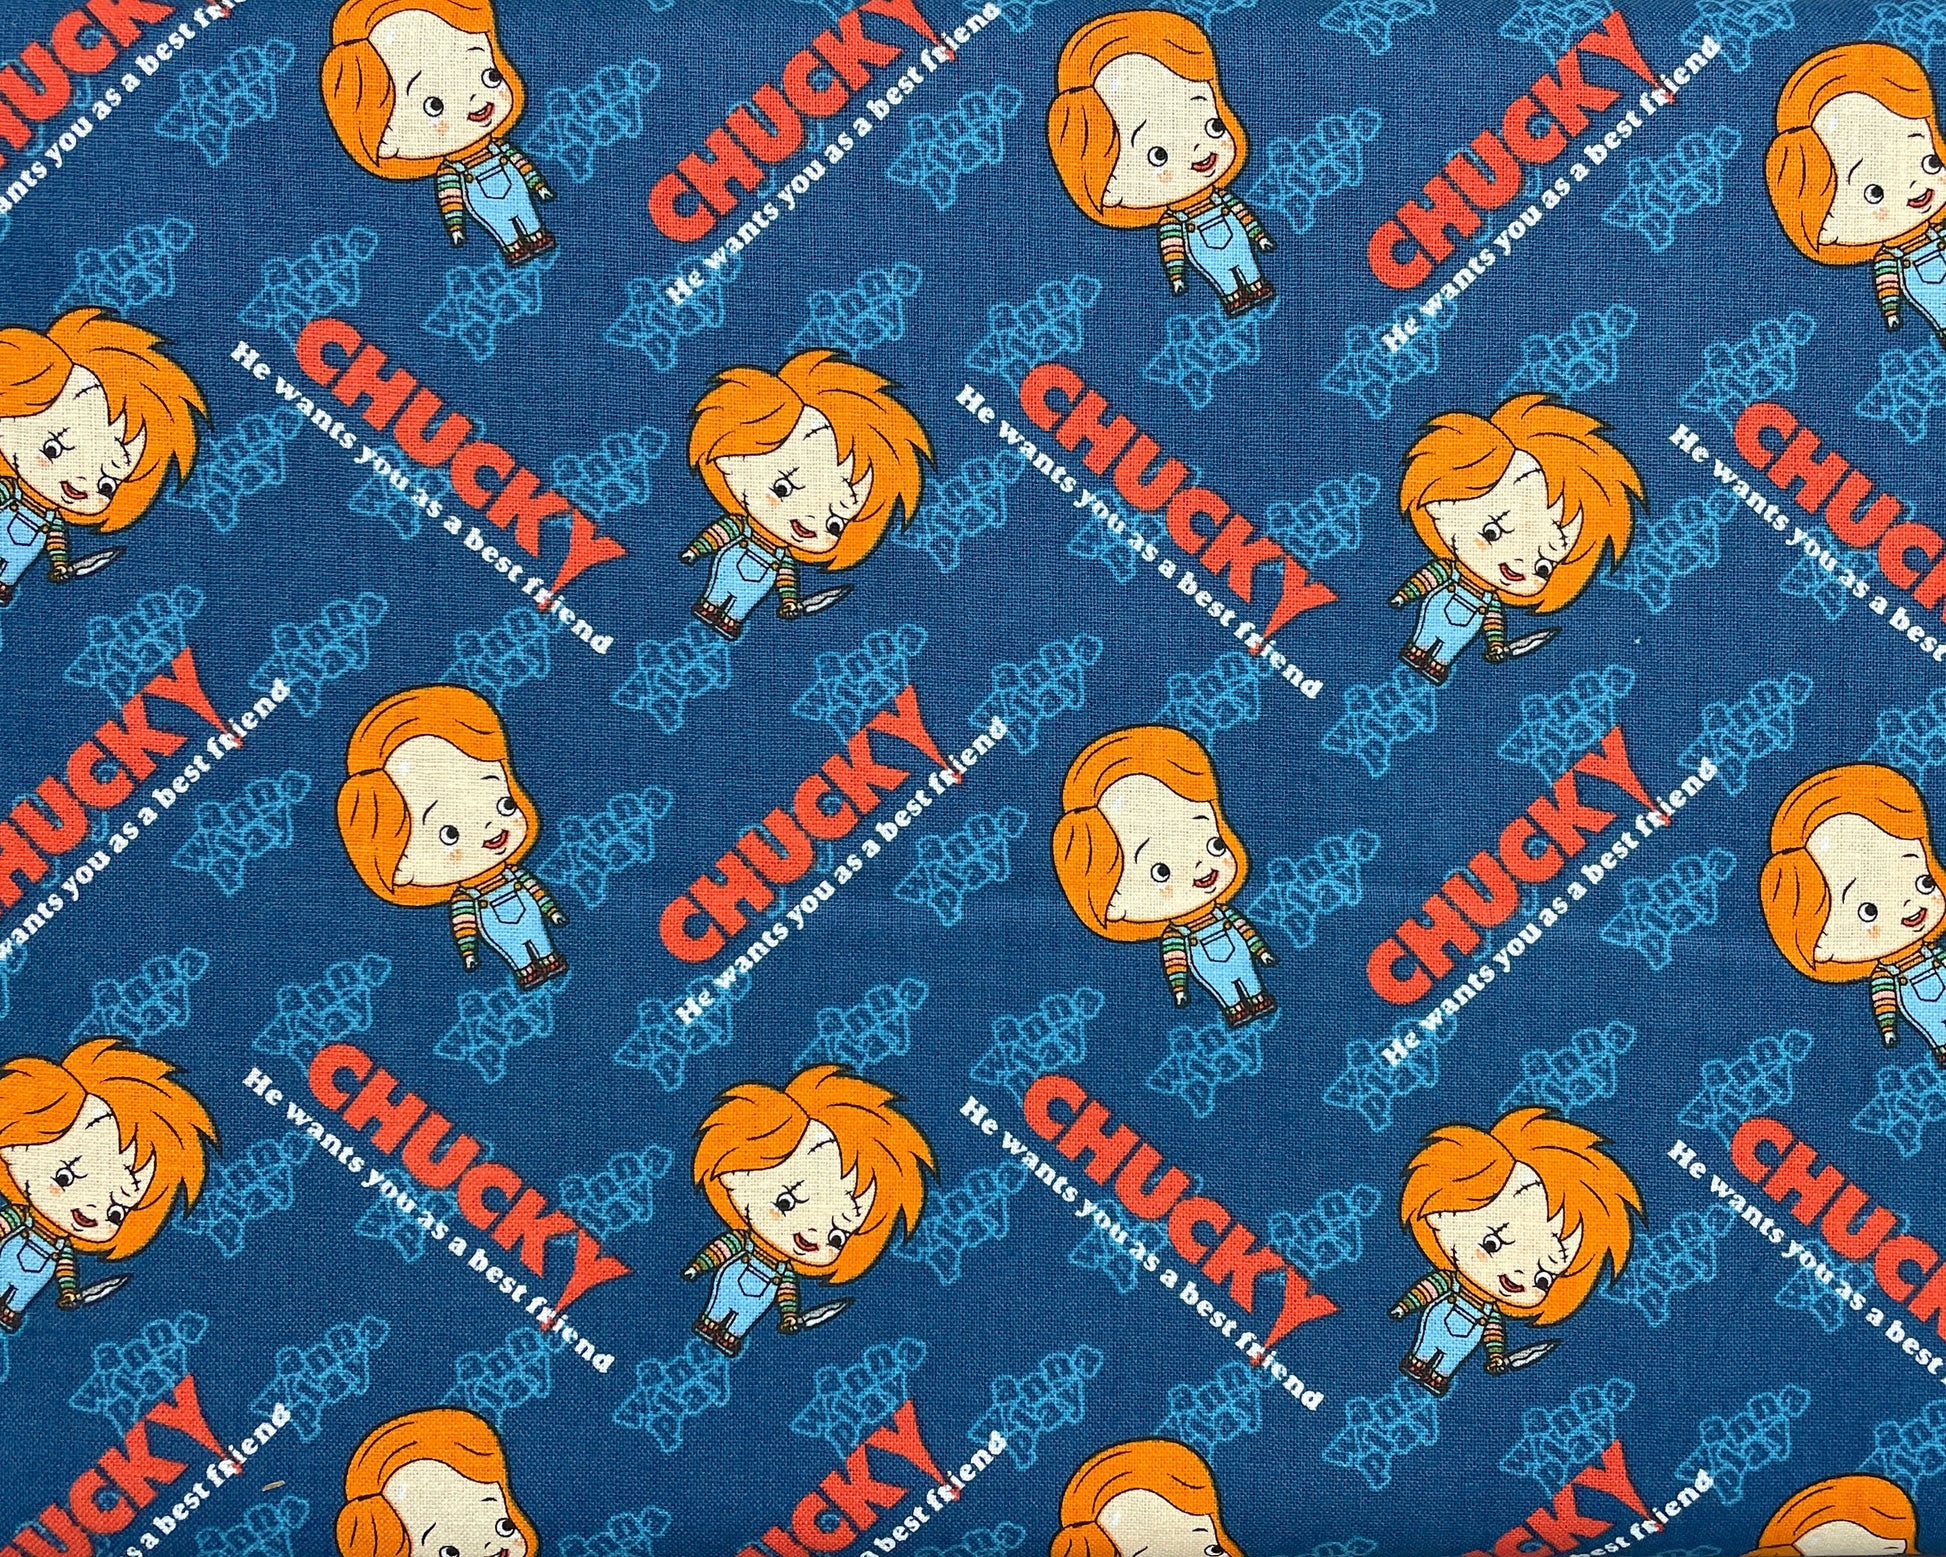 Chucky Fabric - 100% Cotton Fabric by the yard - Camelot Fabrics - Out of Print - Halloween fabric Best Friend Horror movie - Ships NEXT DAY